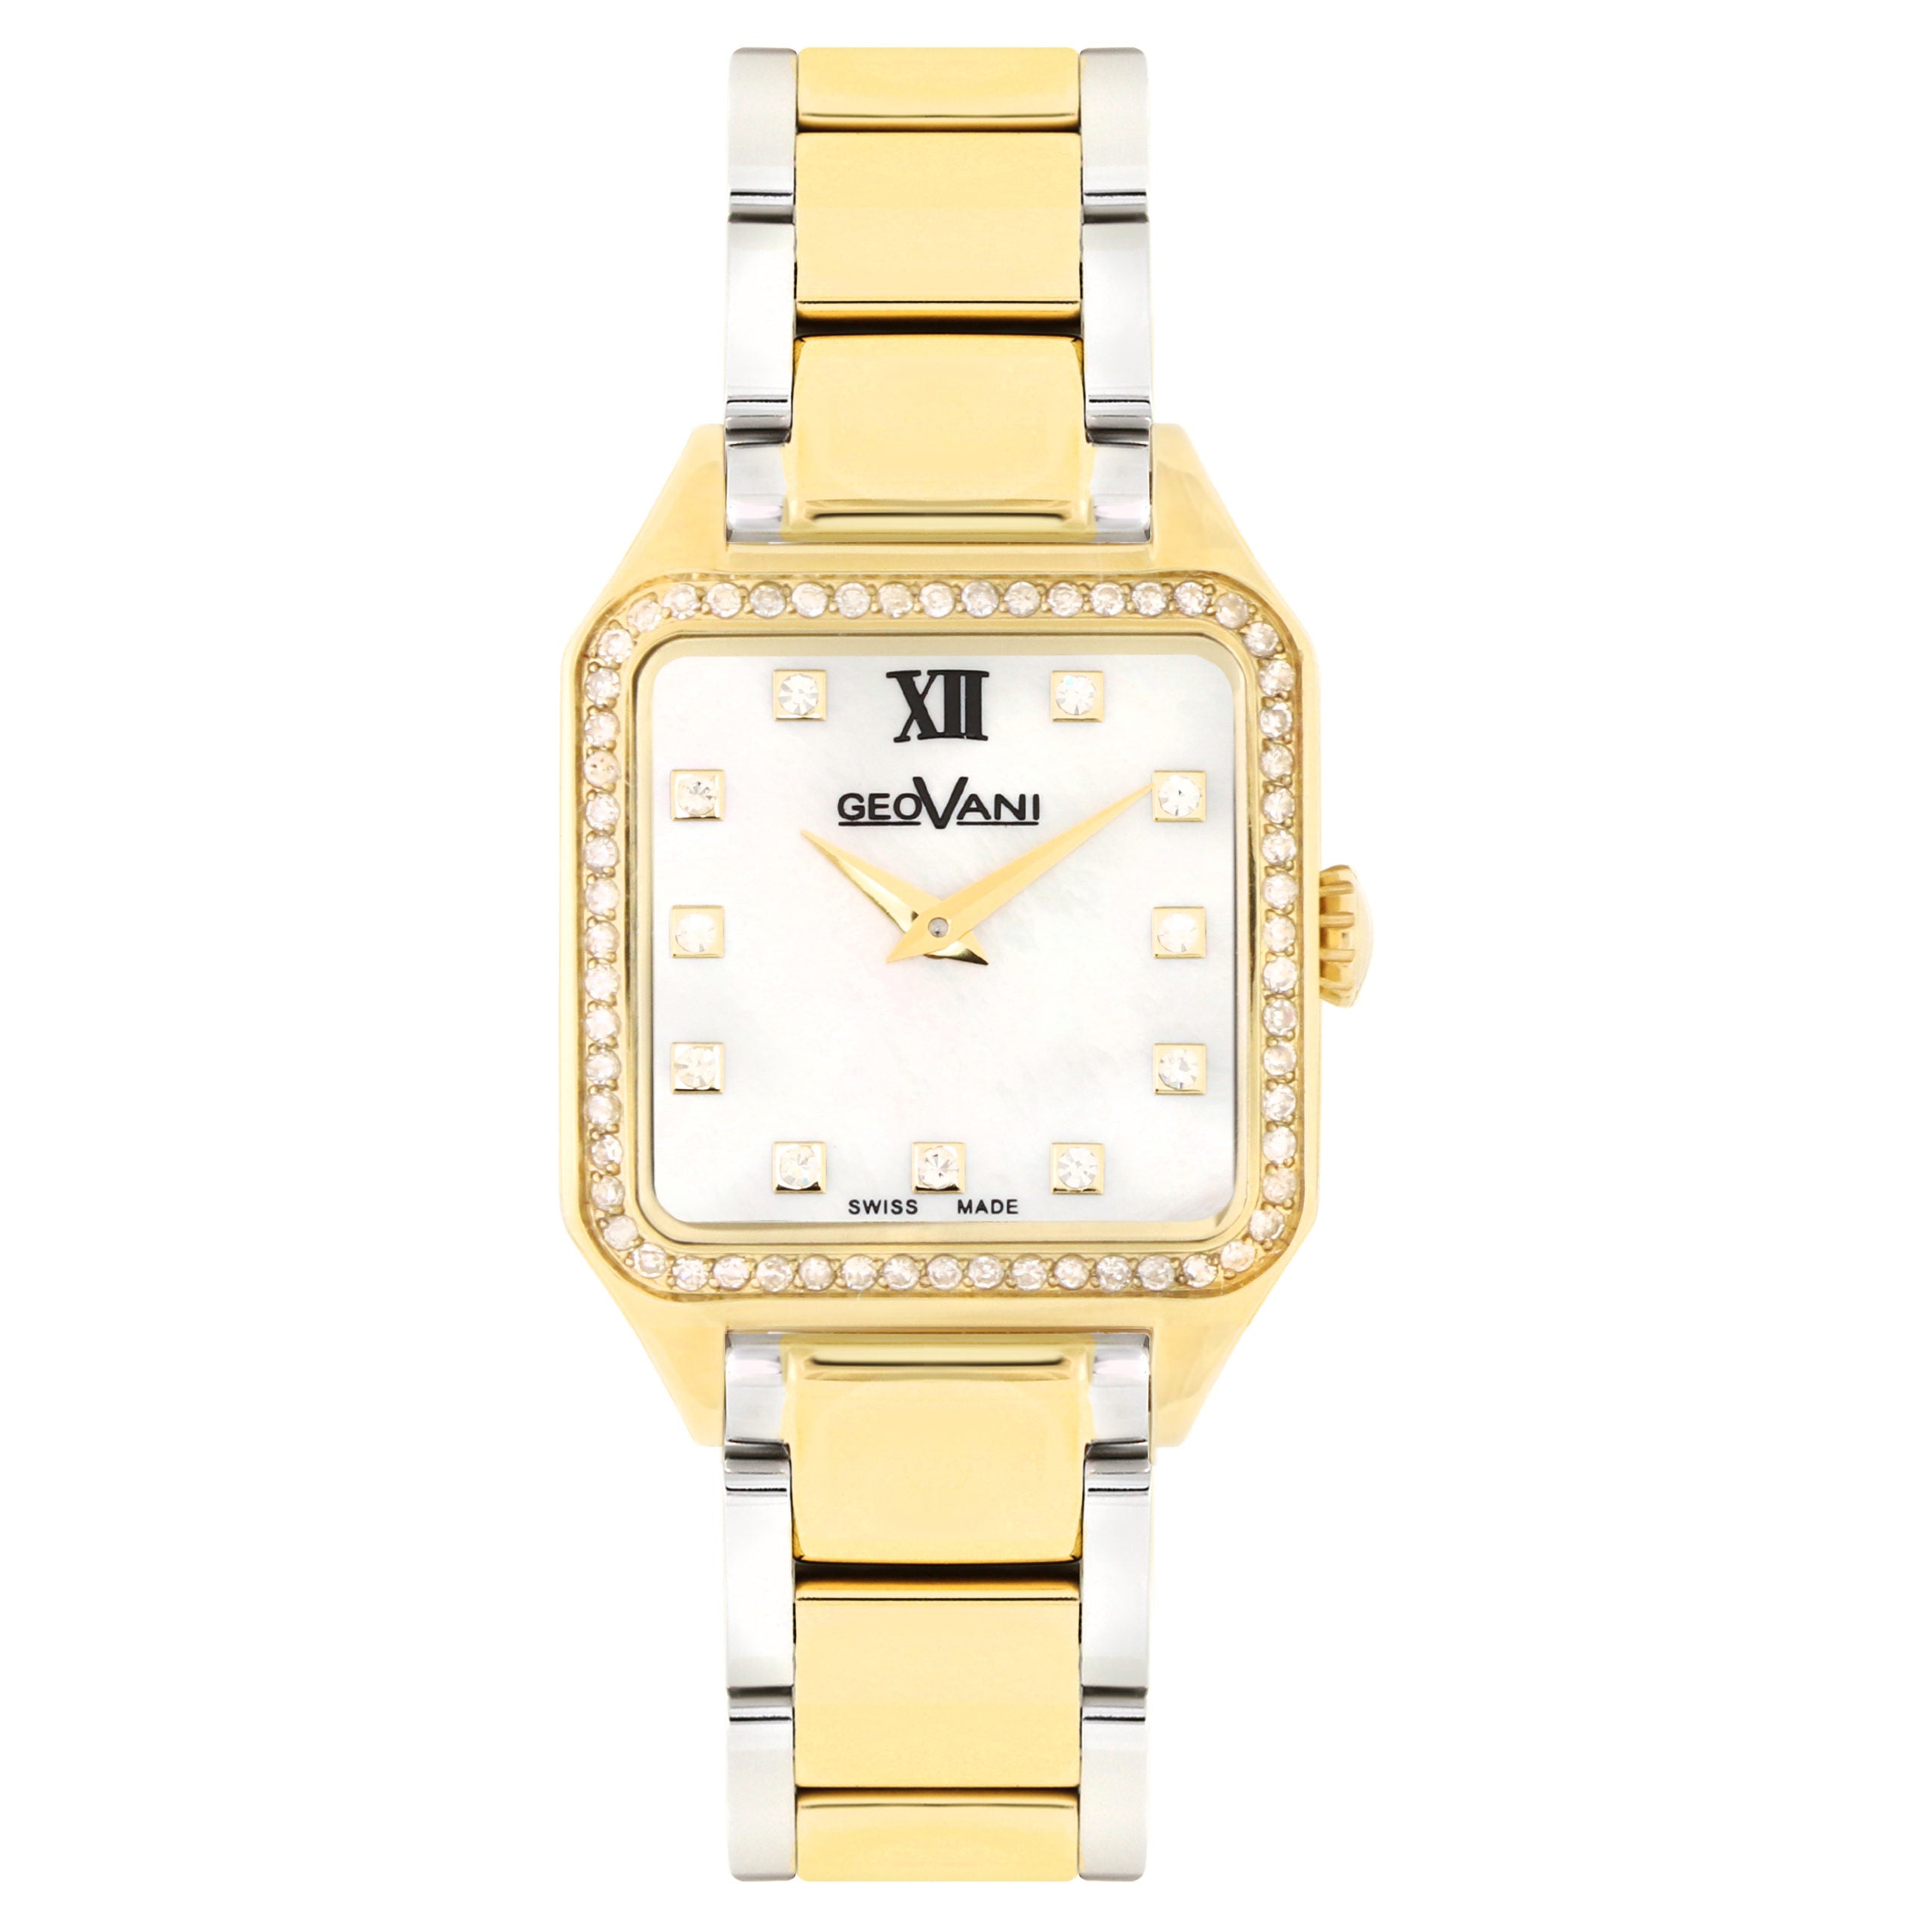 Giovanni Women's Swiss Quartz Watch with Pearly White Dial - GEO-0012